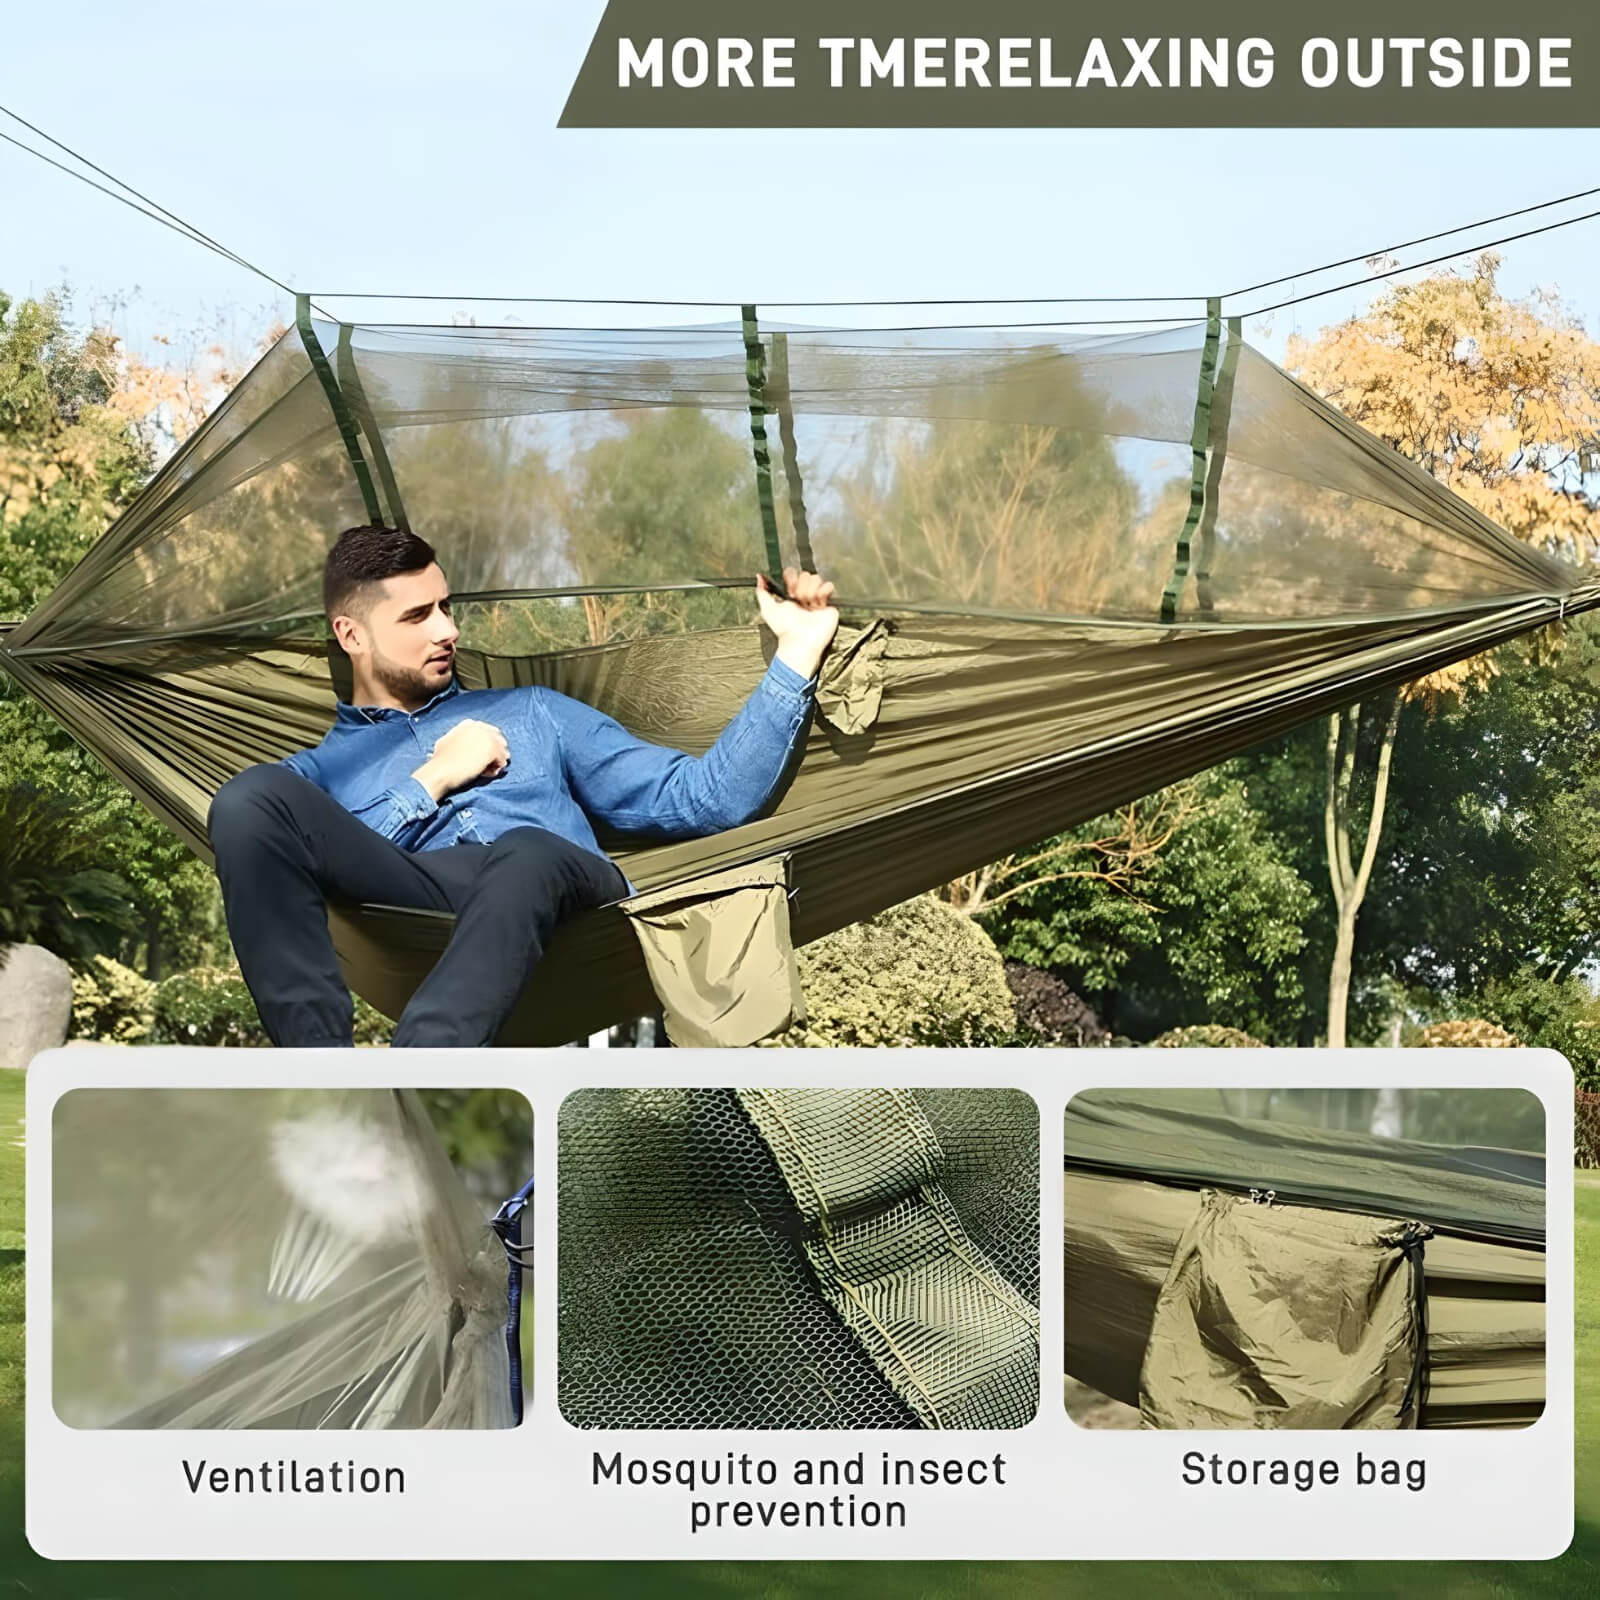 portable-camping-hammock-more-tme-relaxing-outside